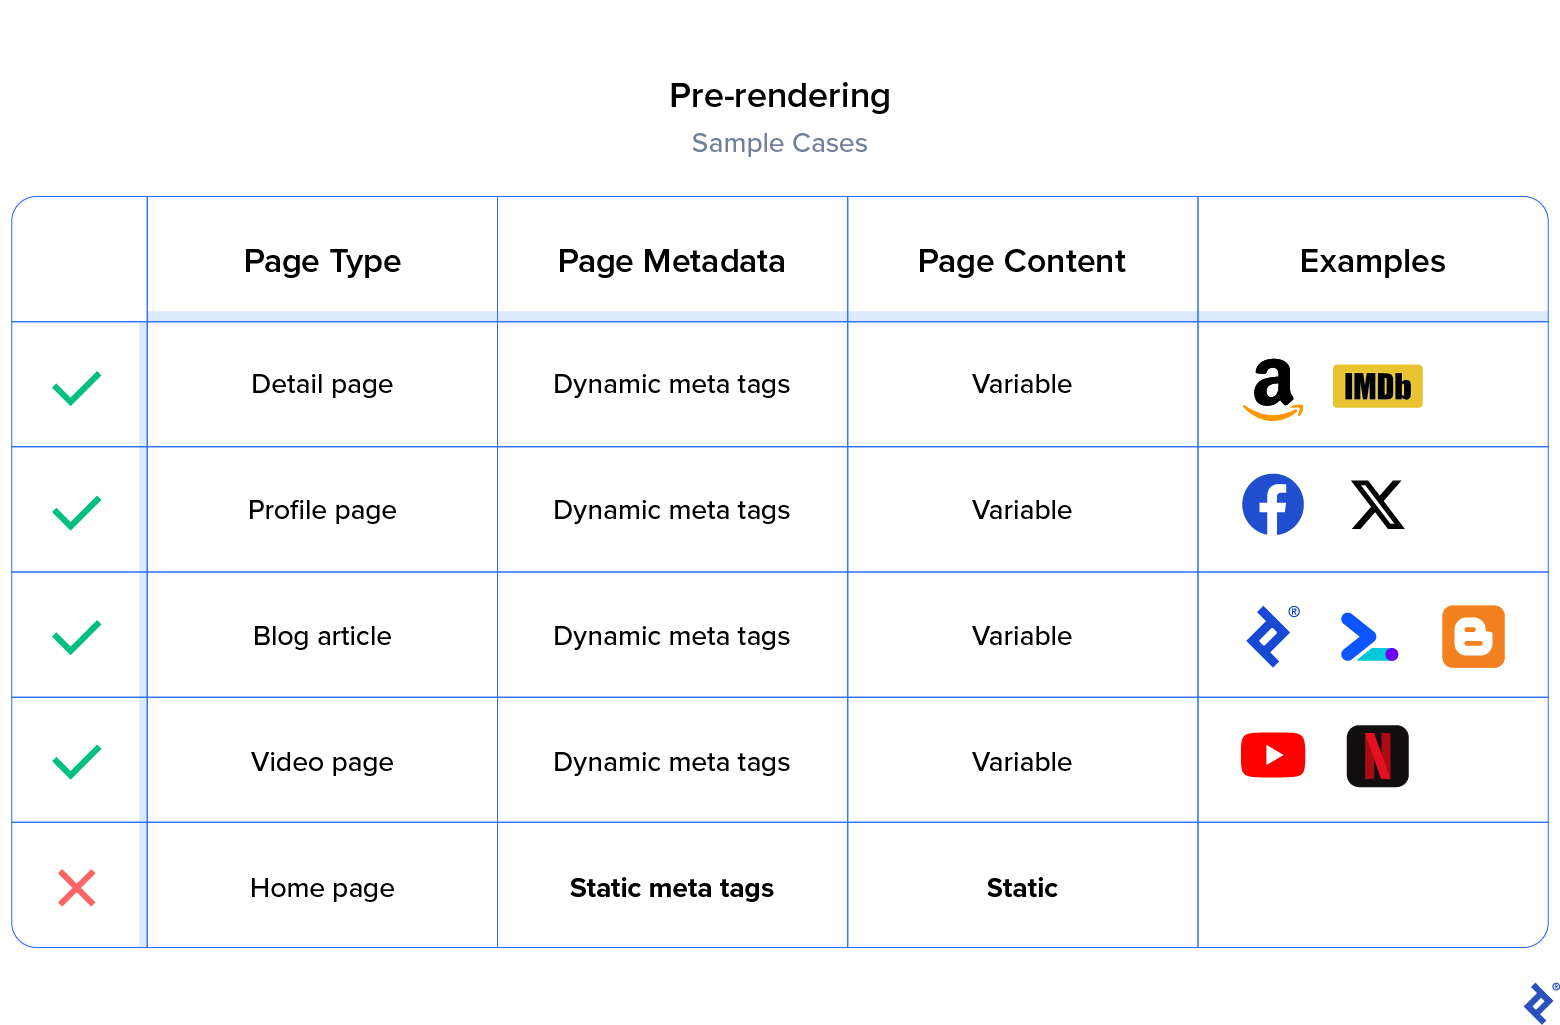 A pre-rendering sample table with page type, metadata, and content for examples, including Amazon, Facebook, Toptal, and YouTube.